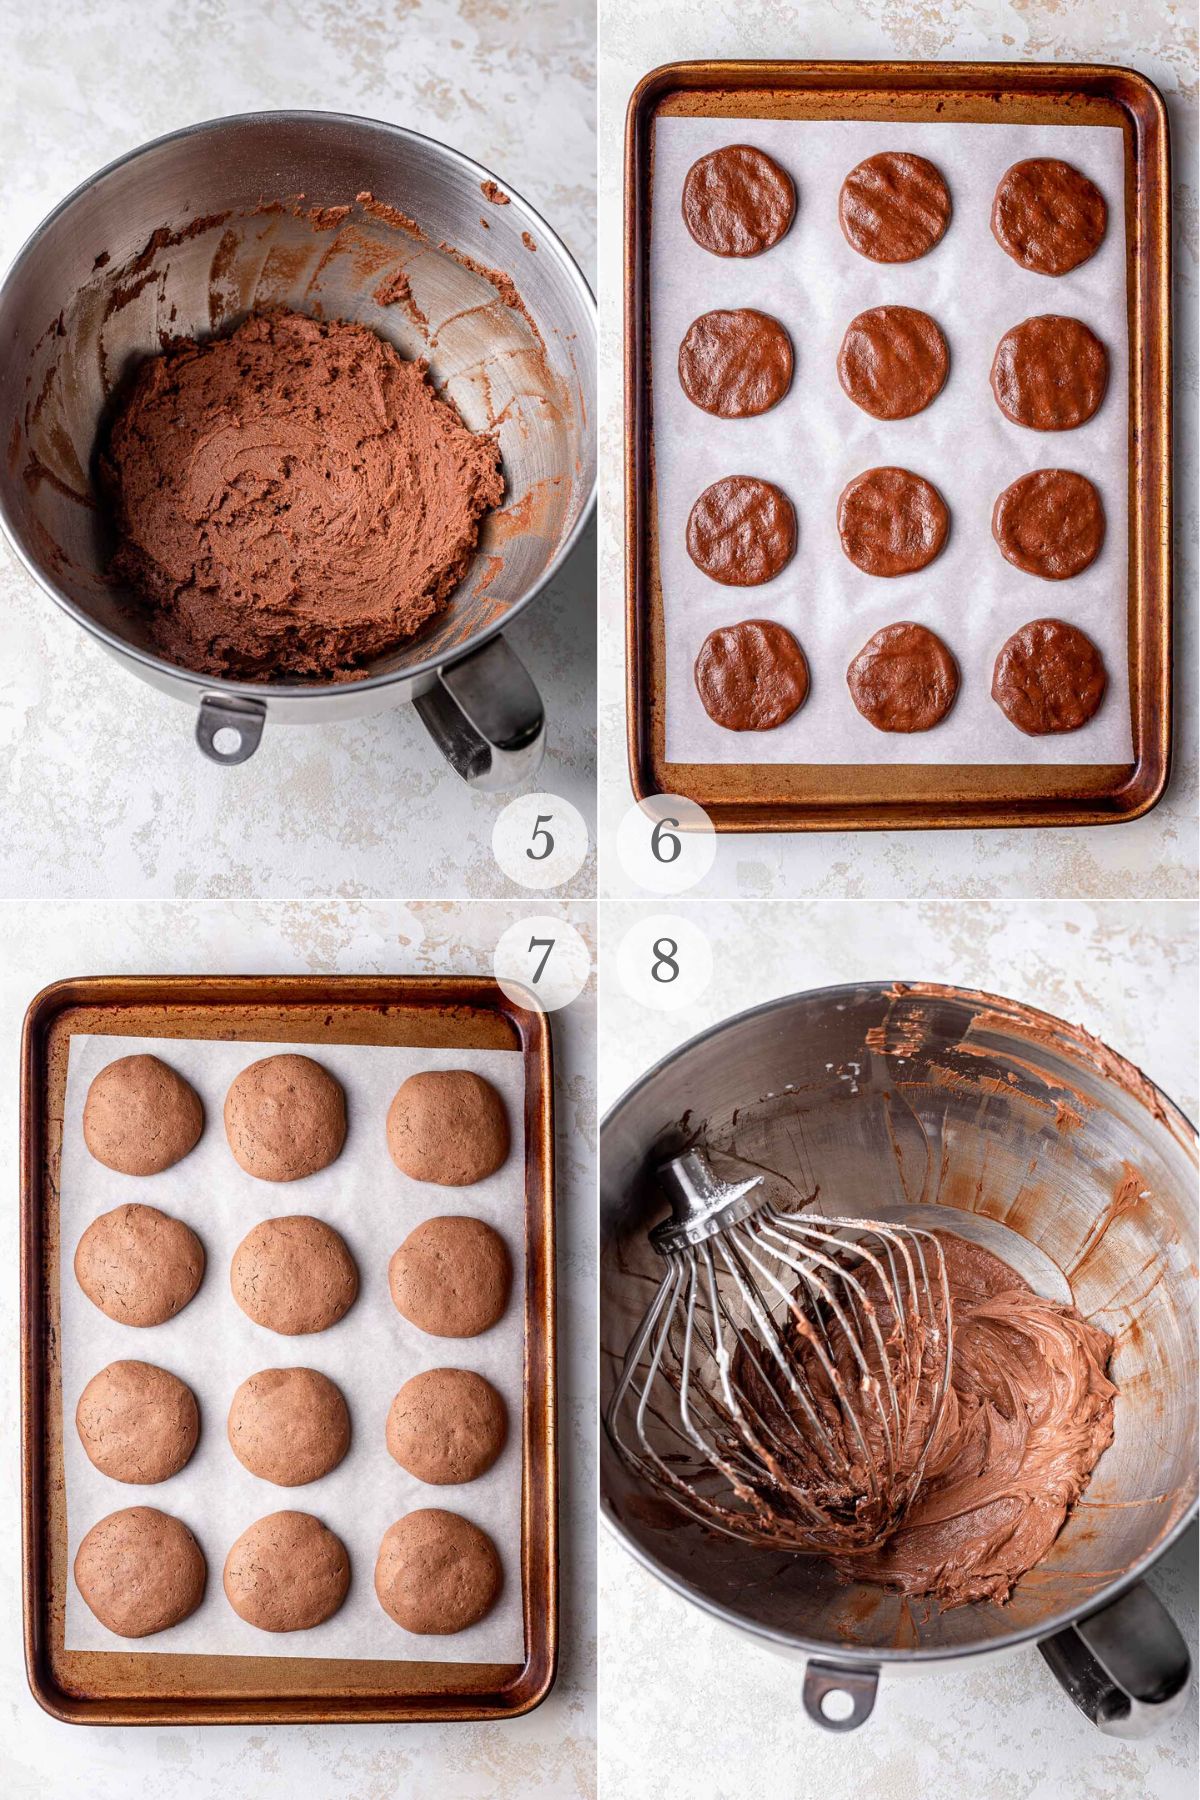 chocolate peppermint cookies recipe steps 5-8.